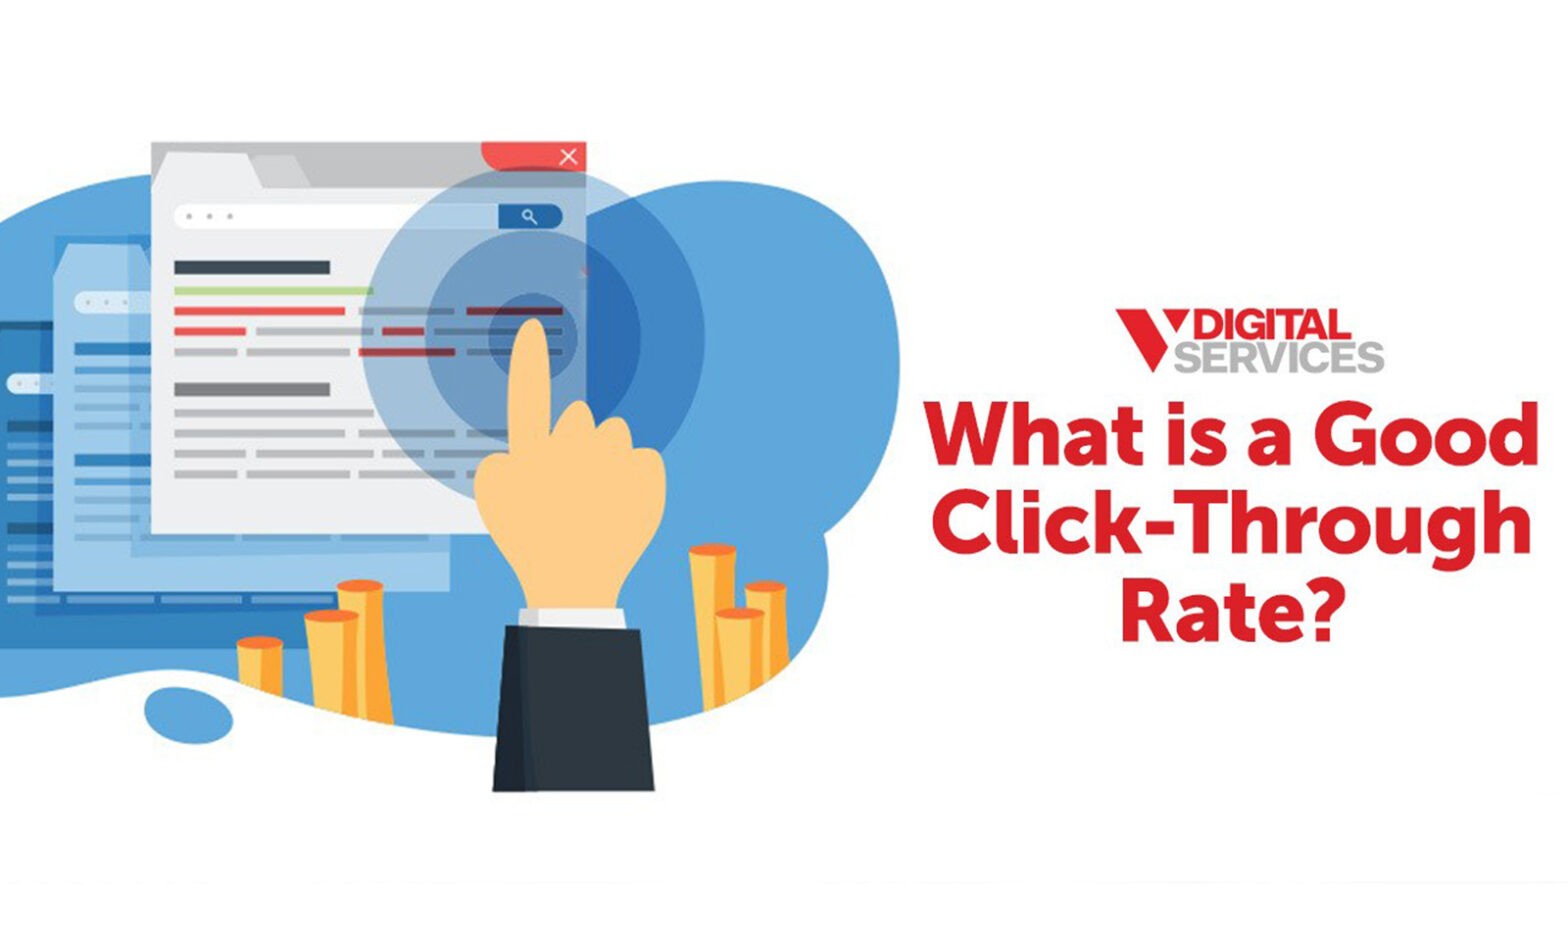 What is a Good Click-Through Rate?